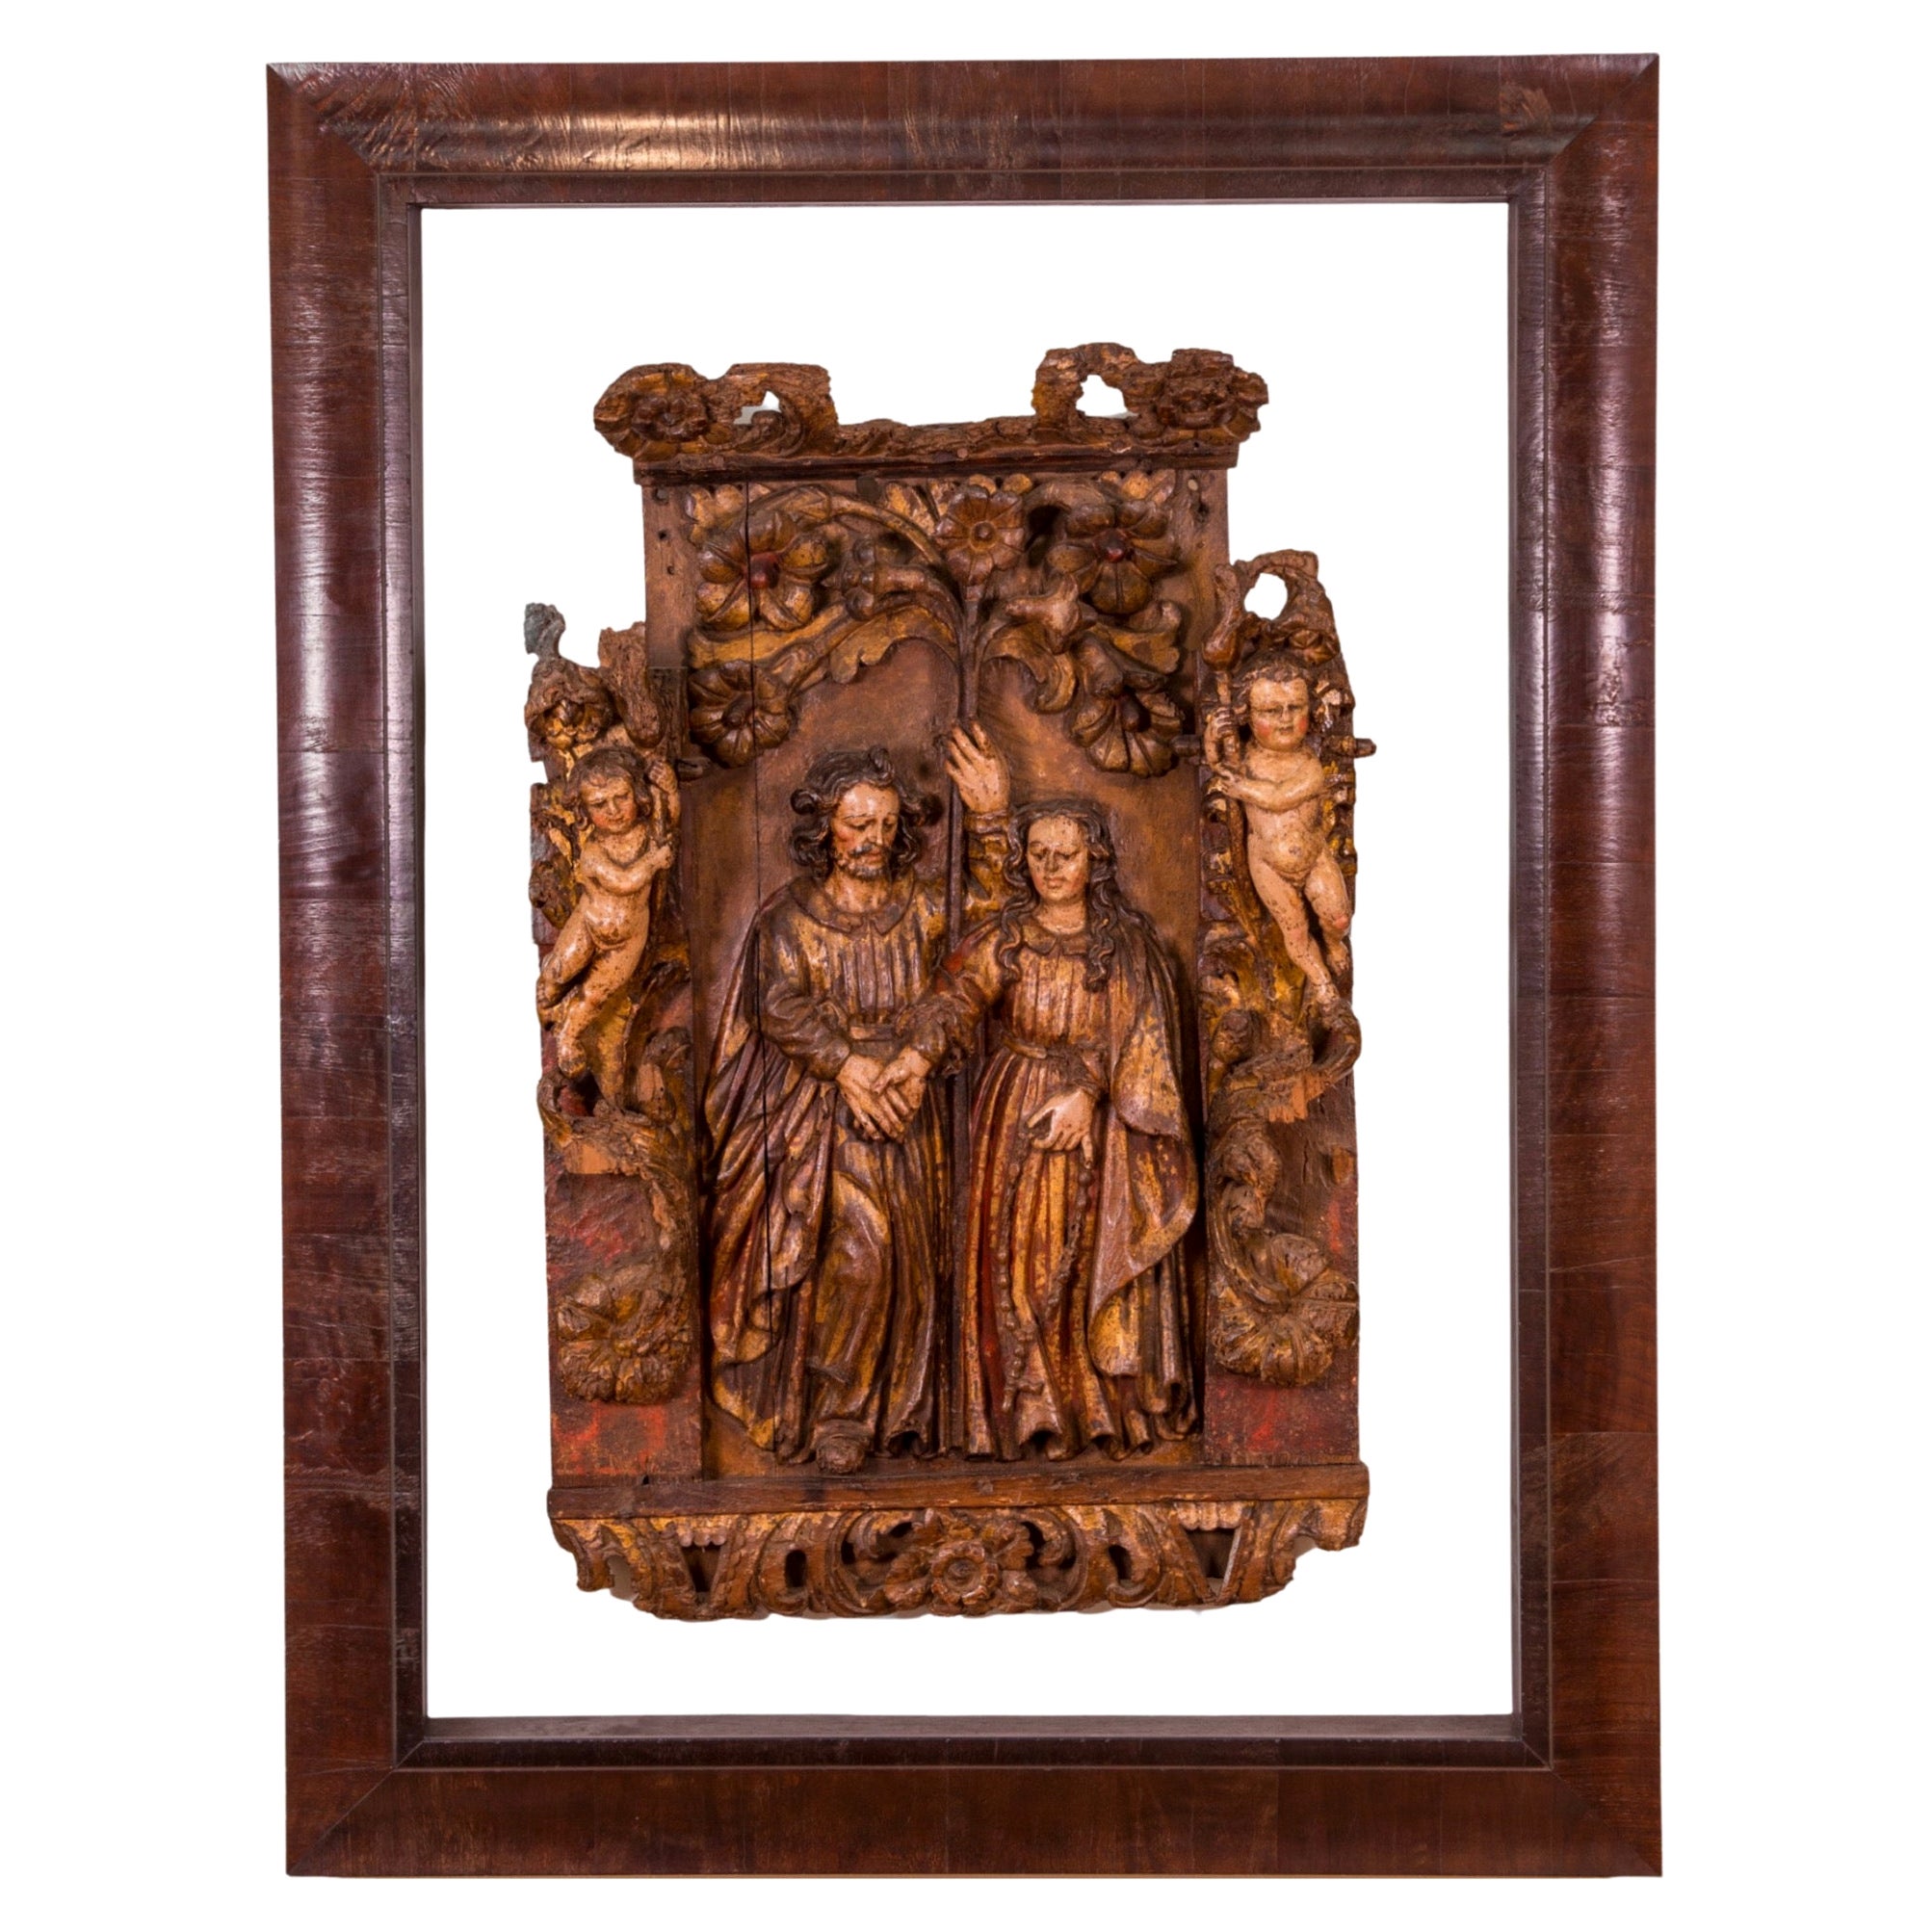 The Betrothal and Love of Mary and Joseph, 1500-1600s, Carved Wood Polychromed